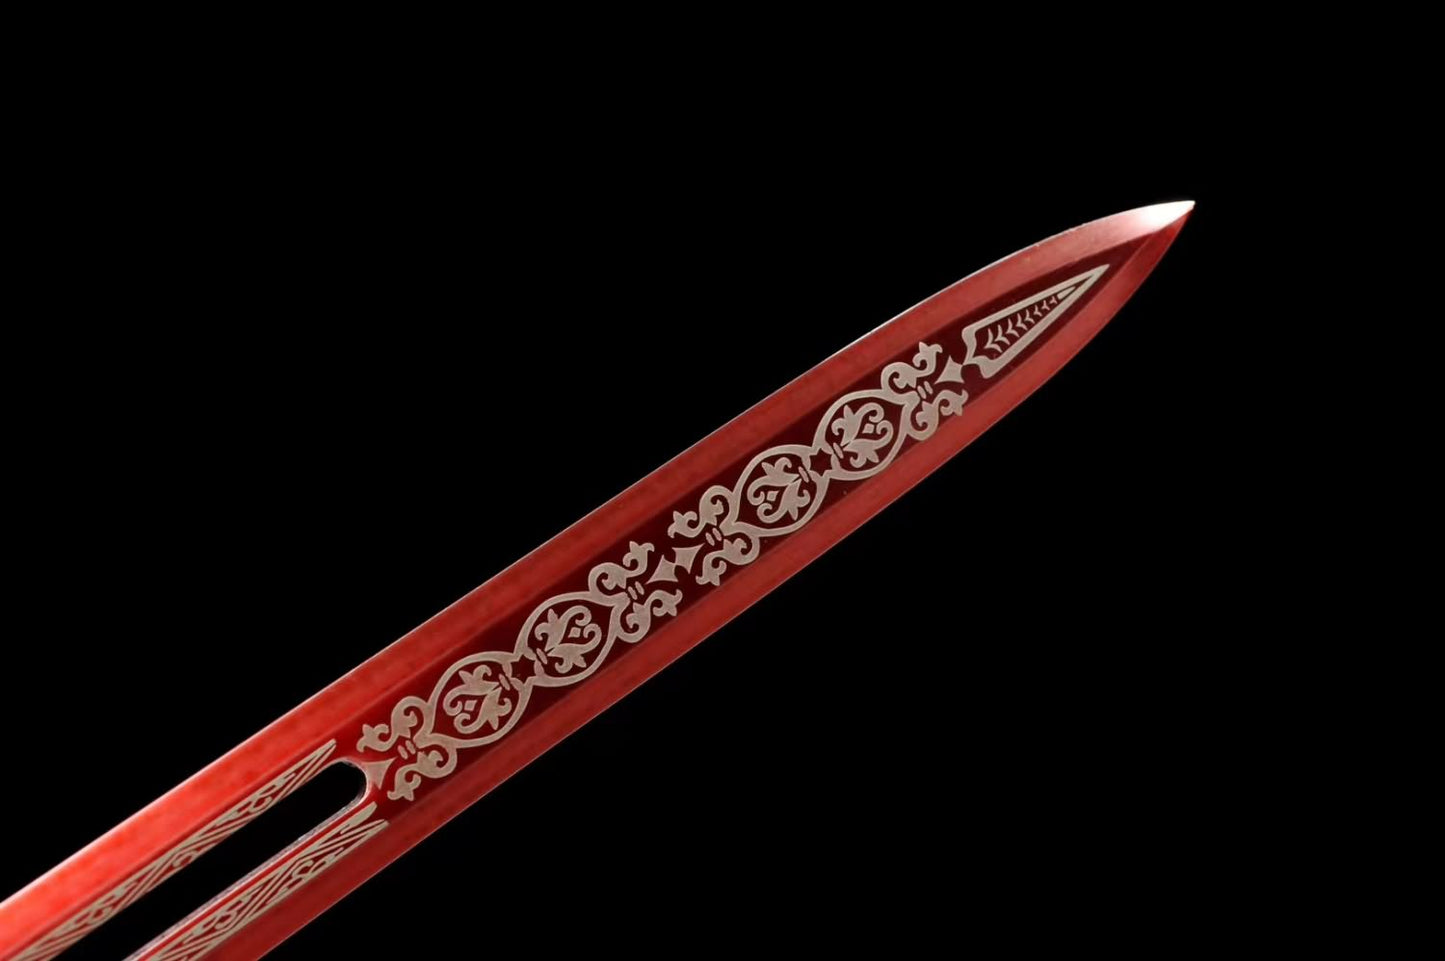 Traditional Chinese Sword High Manganese Steel Blade with Blood-Red Hollow Design